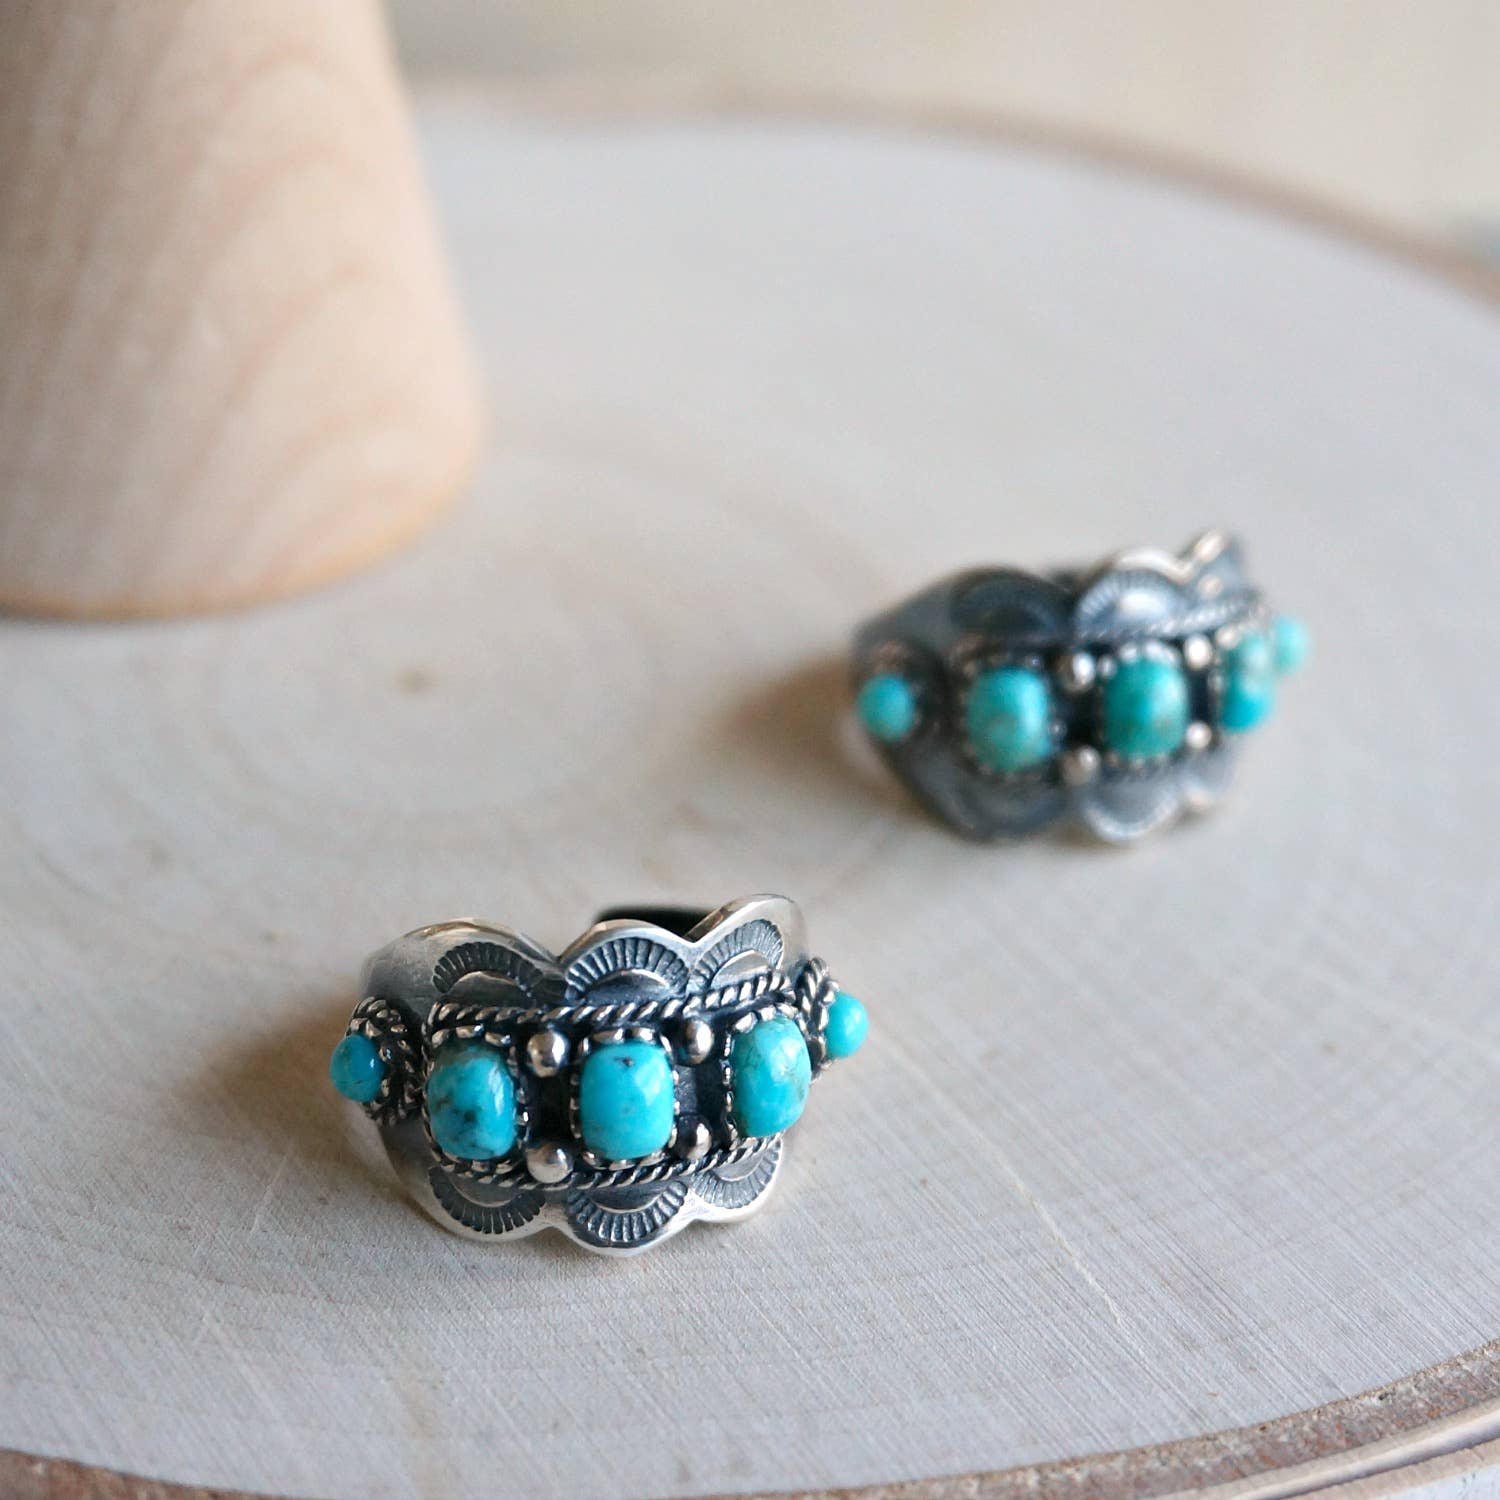 Turquoise treated and Silver 925 earrings vintage